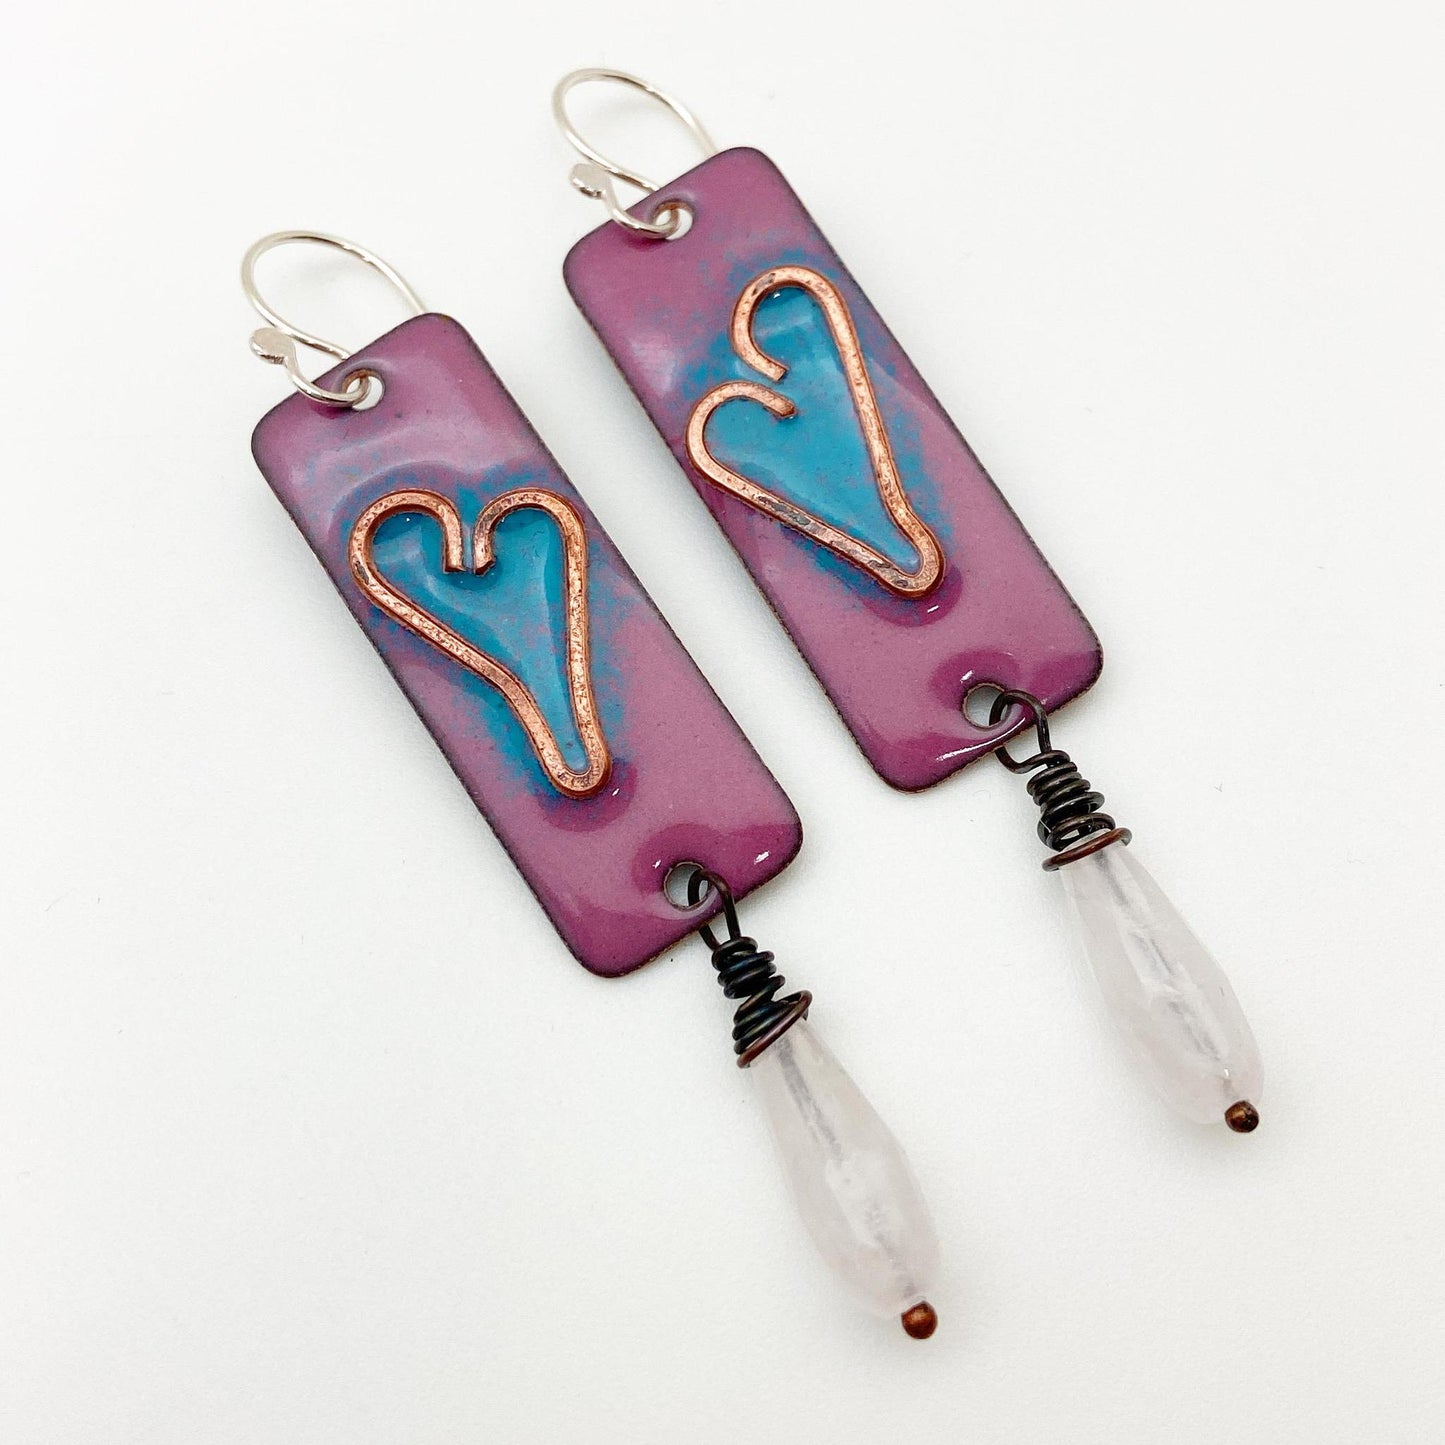 Earrings - Turquoise Hearts with Clear Crystals - Copper and Enamel on Copper